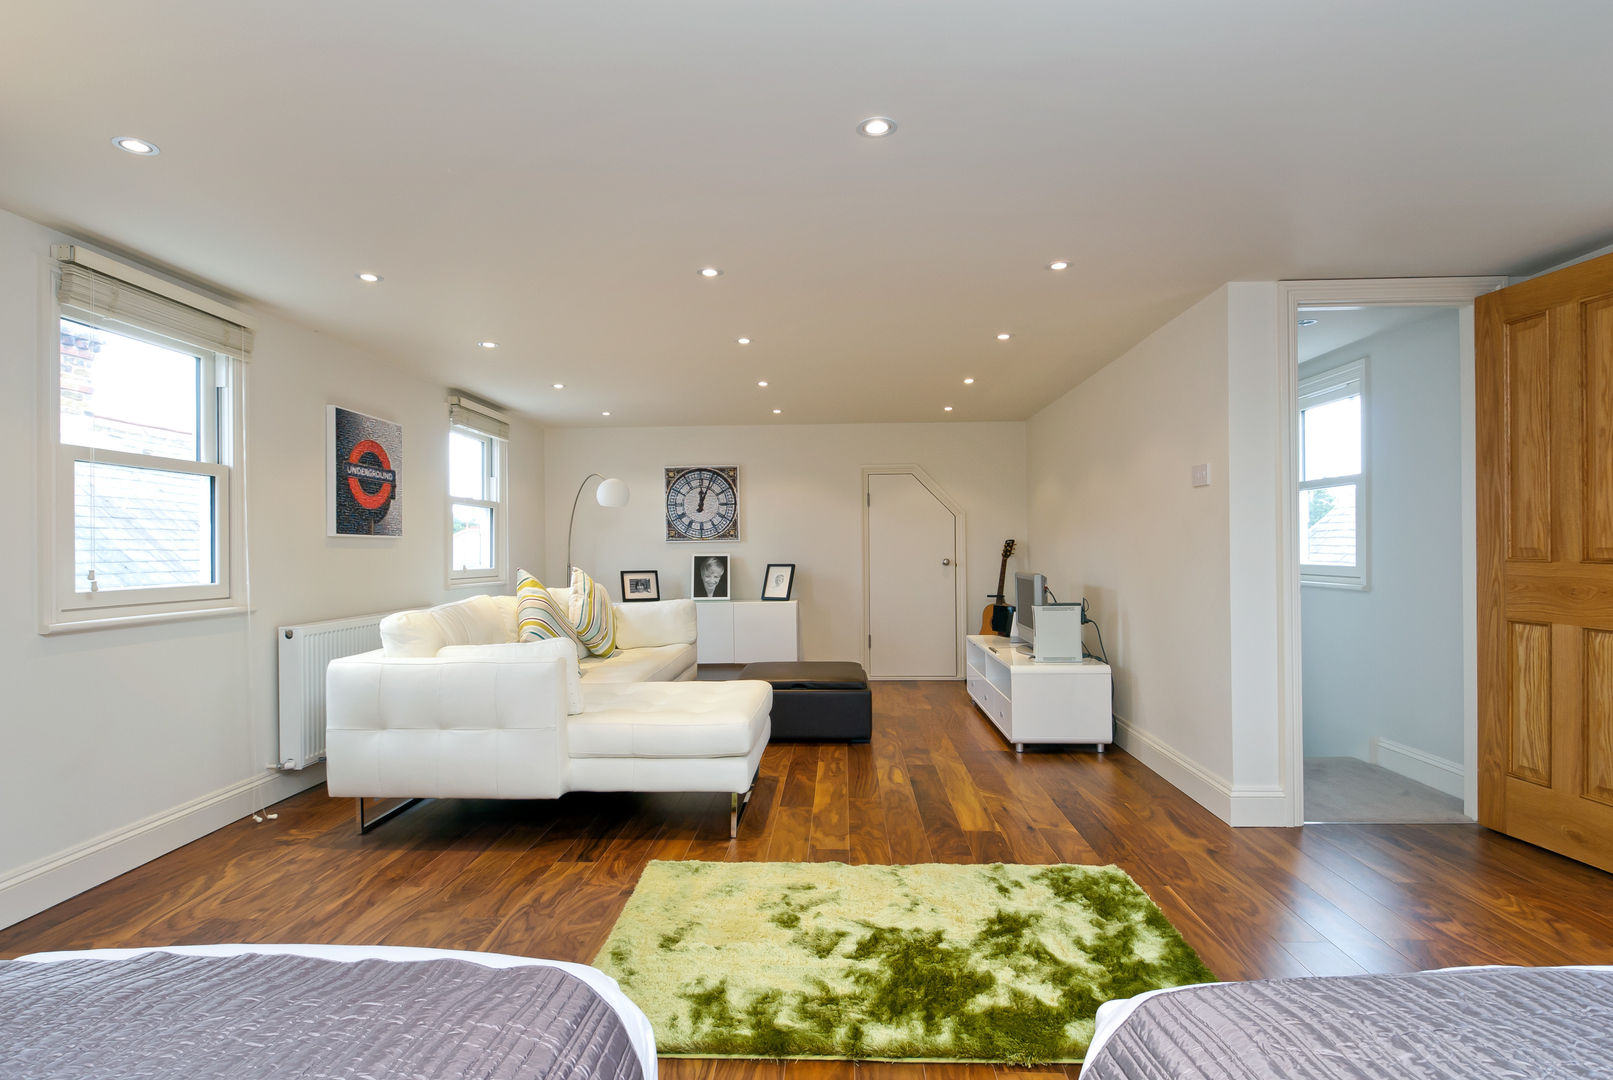 Modern living area transformation A1 Lofts and Extensions Modern style bedroom